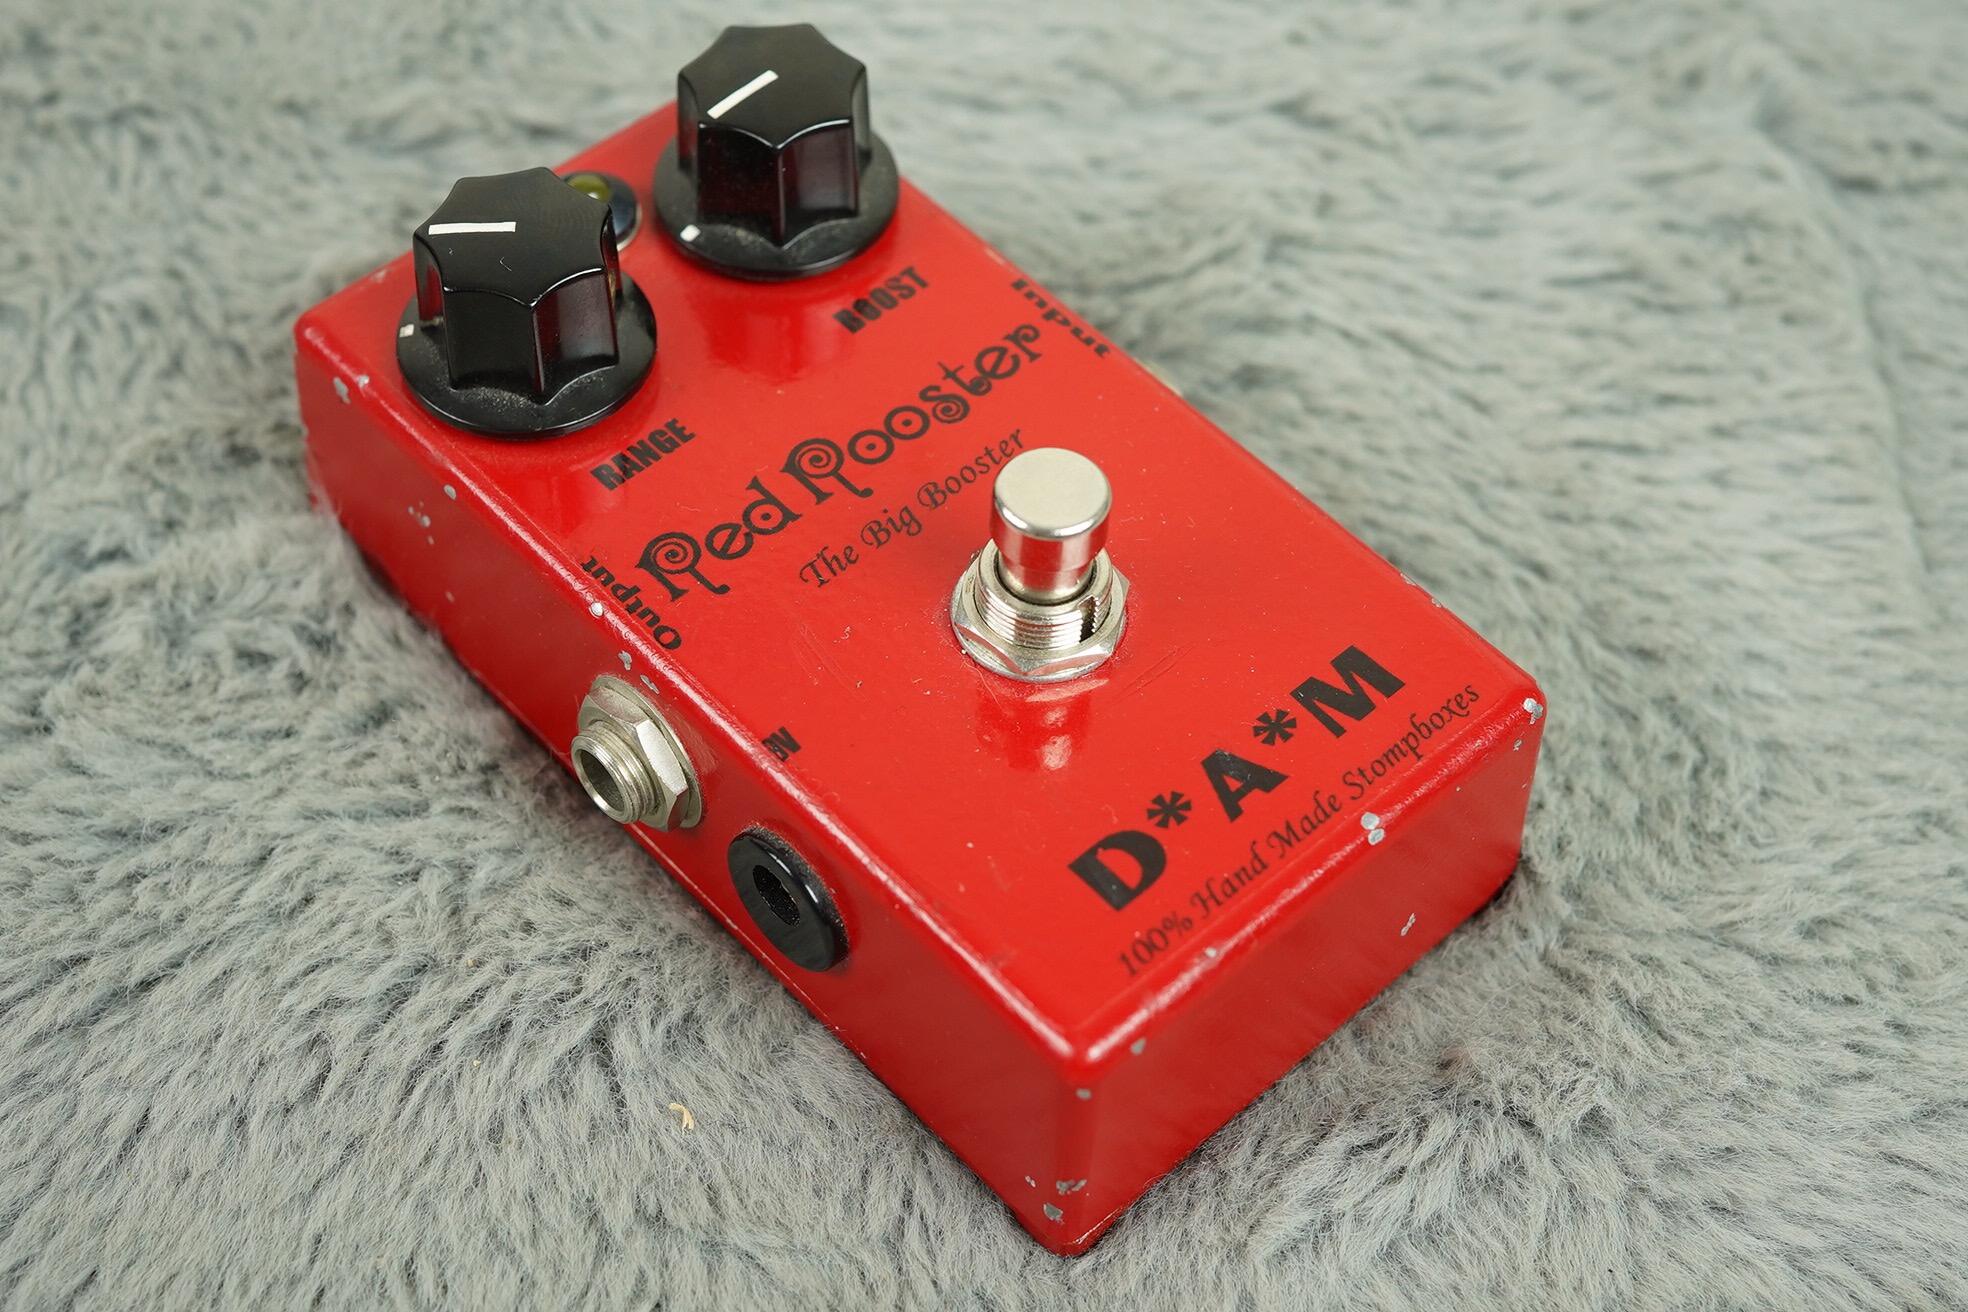 D.A.M Red Rooster / Germanium Booster | www.gamutgallerympls.com